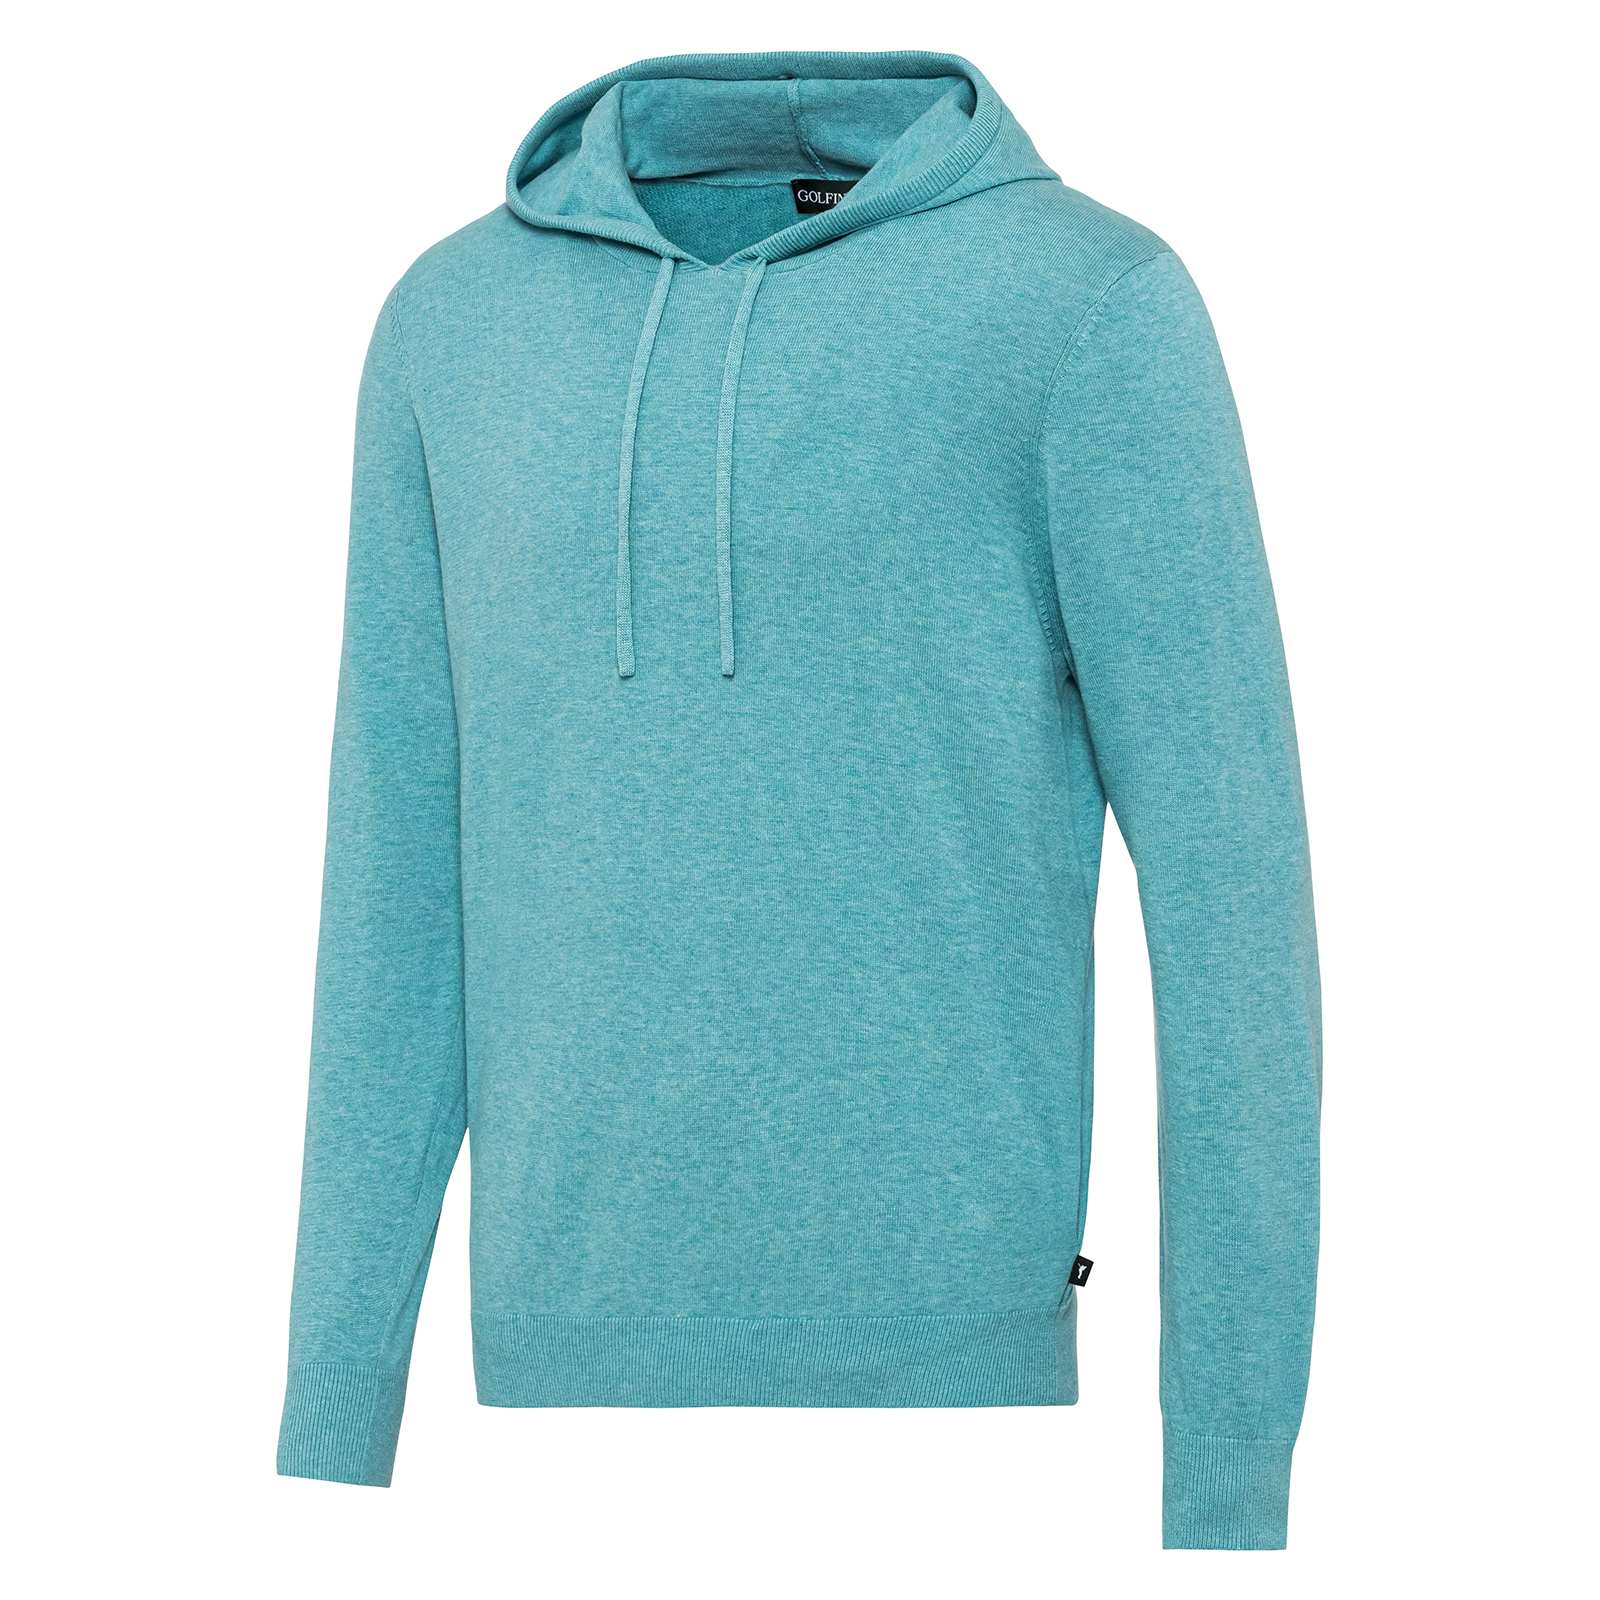 Comfortable men's cotton sweater with hood